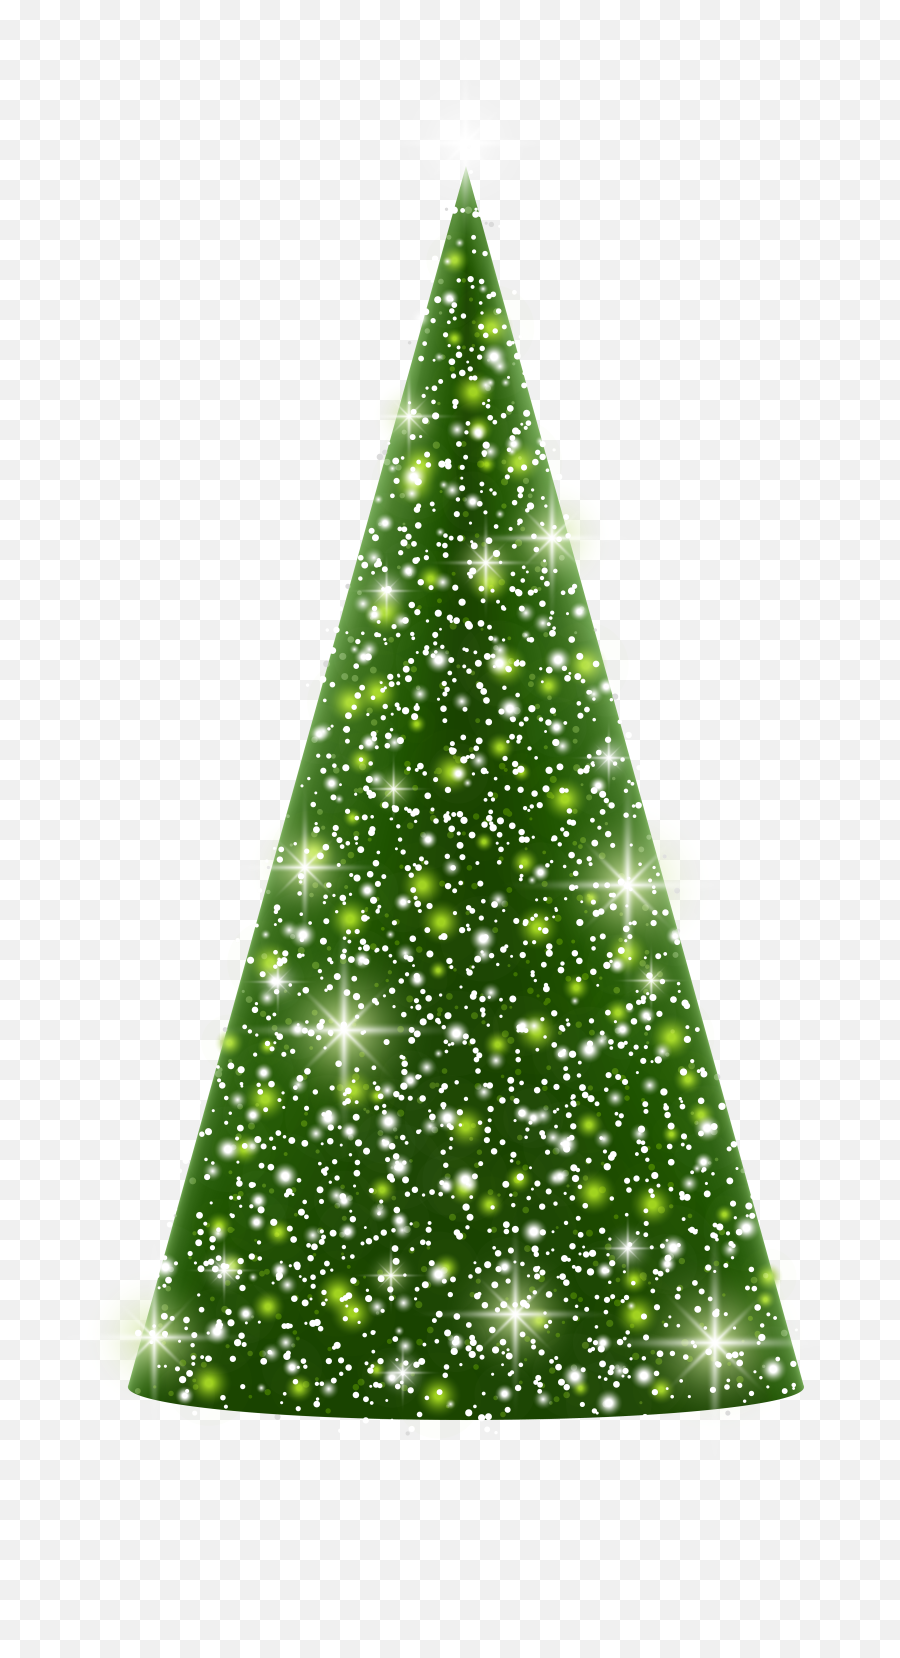 Library Of Royalty Free Evergreen Tree Png Files - Christmas Tree,Evergreen Png